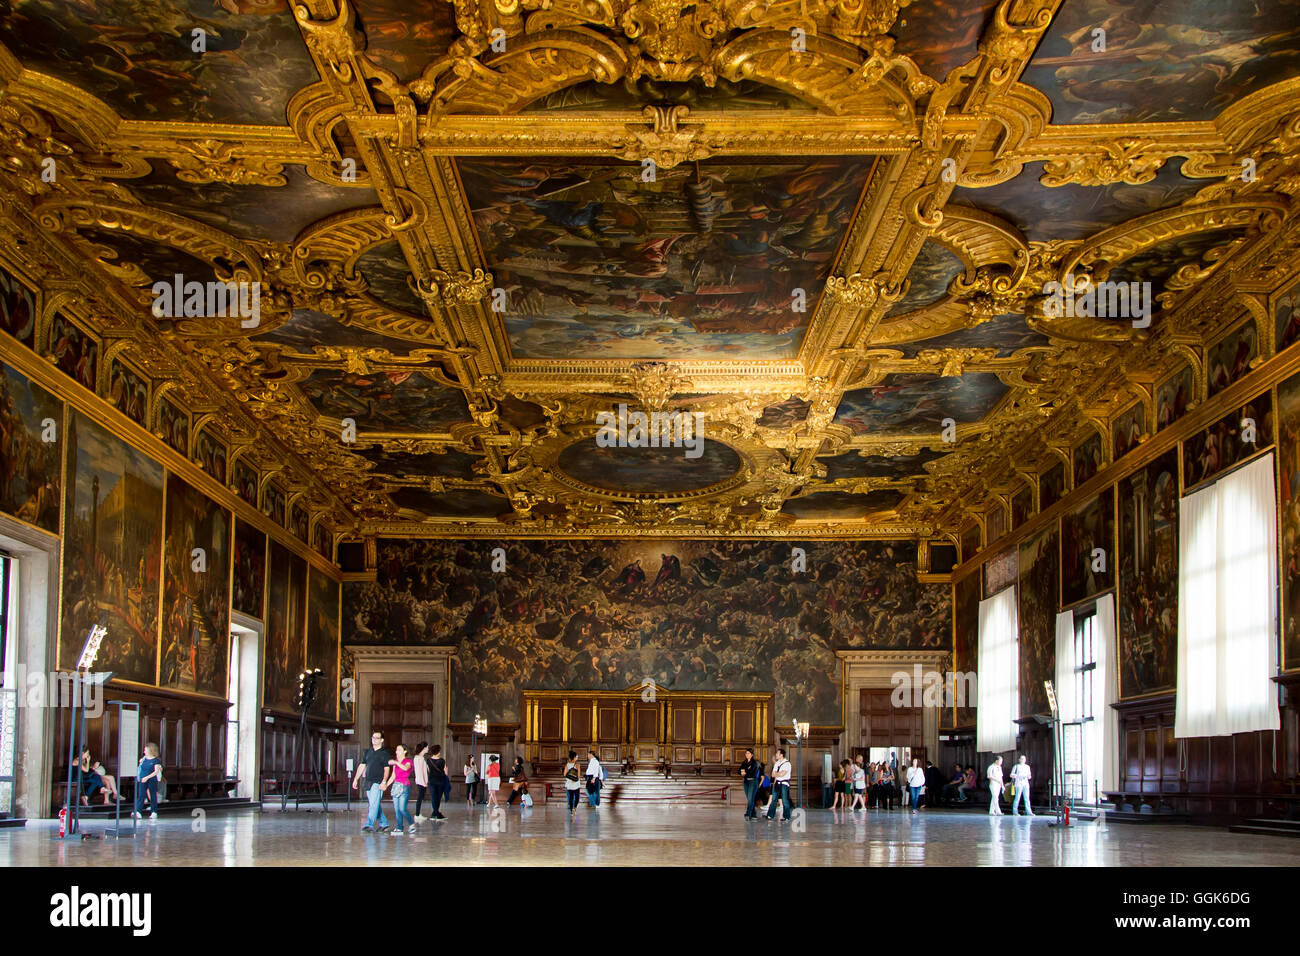 Sala del Maggior Consiglio or hall of the big council, with frescoes on the walls and the ceiling, Venice, Italy, Europe Stock Photo